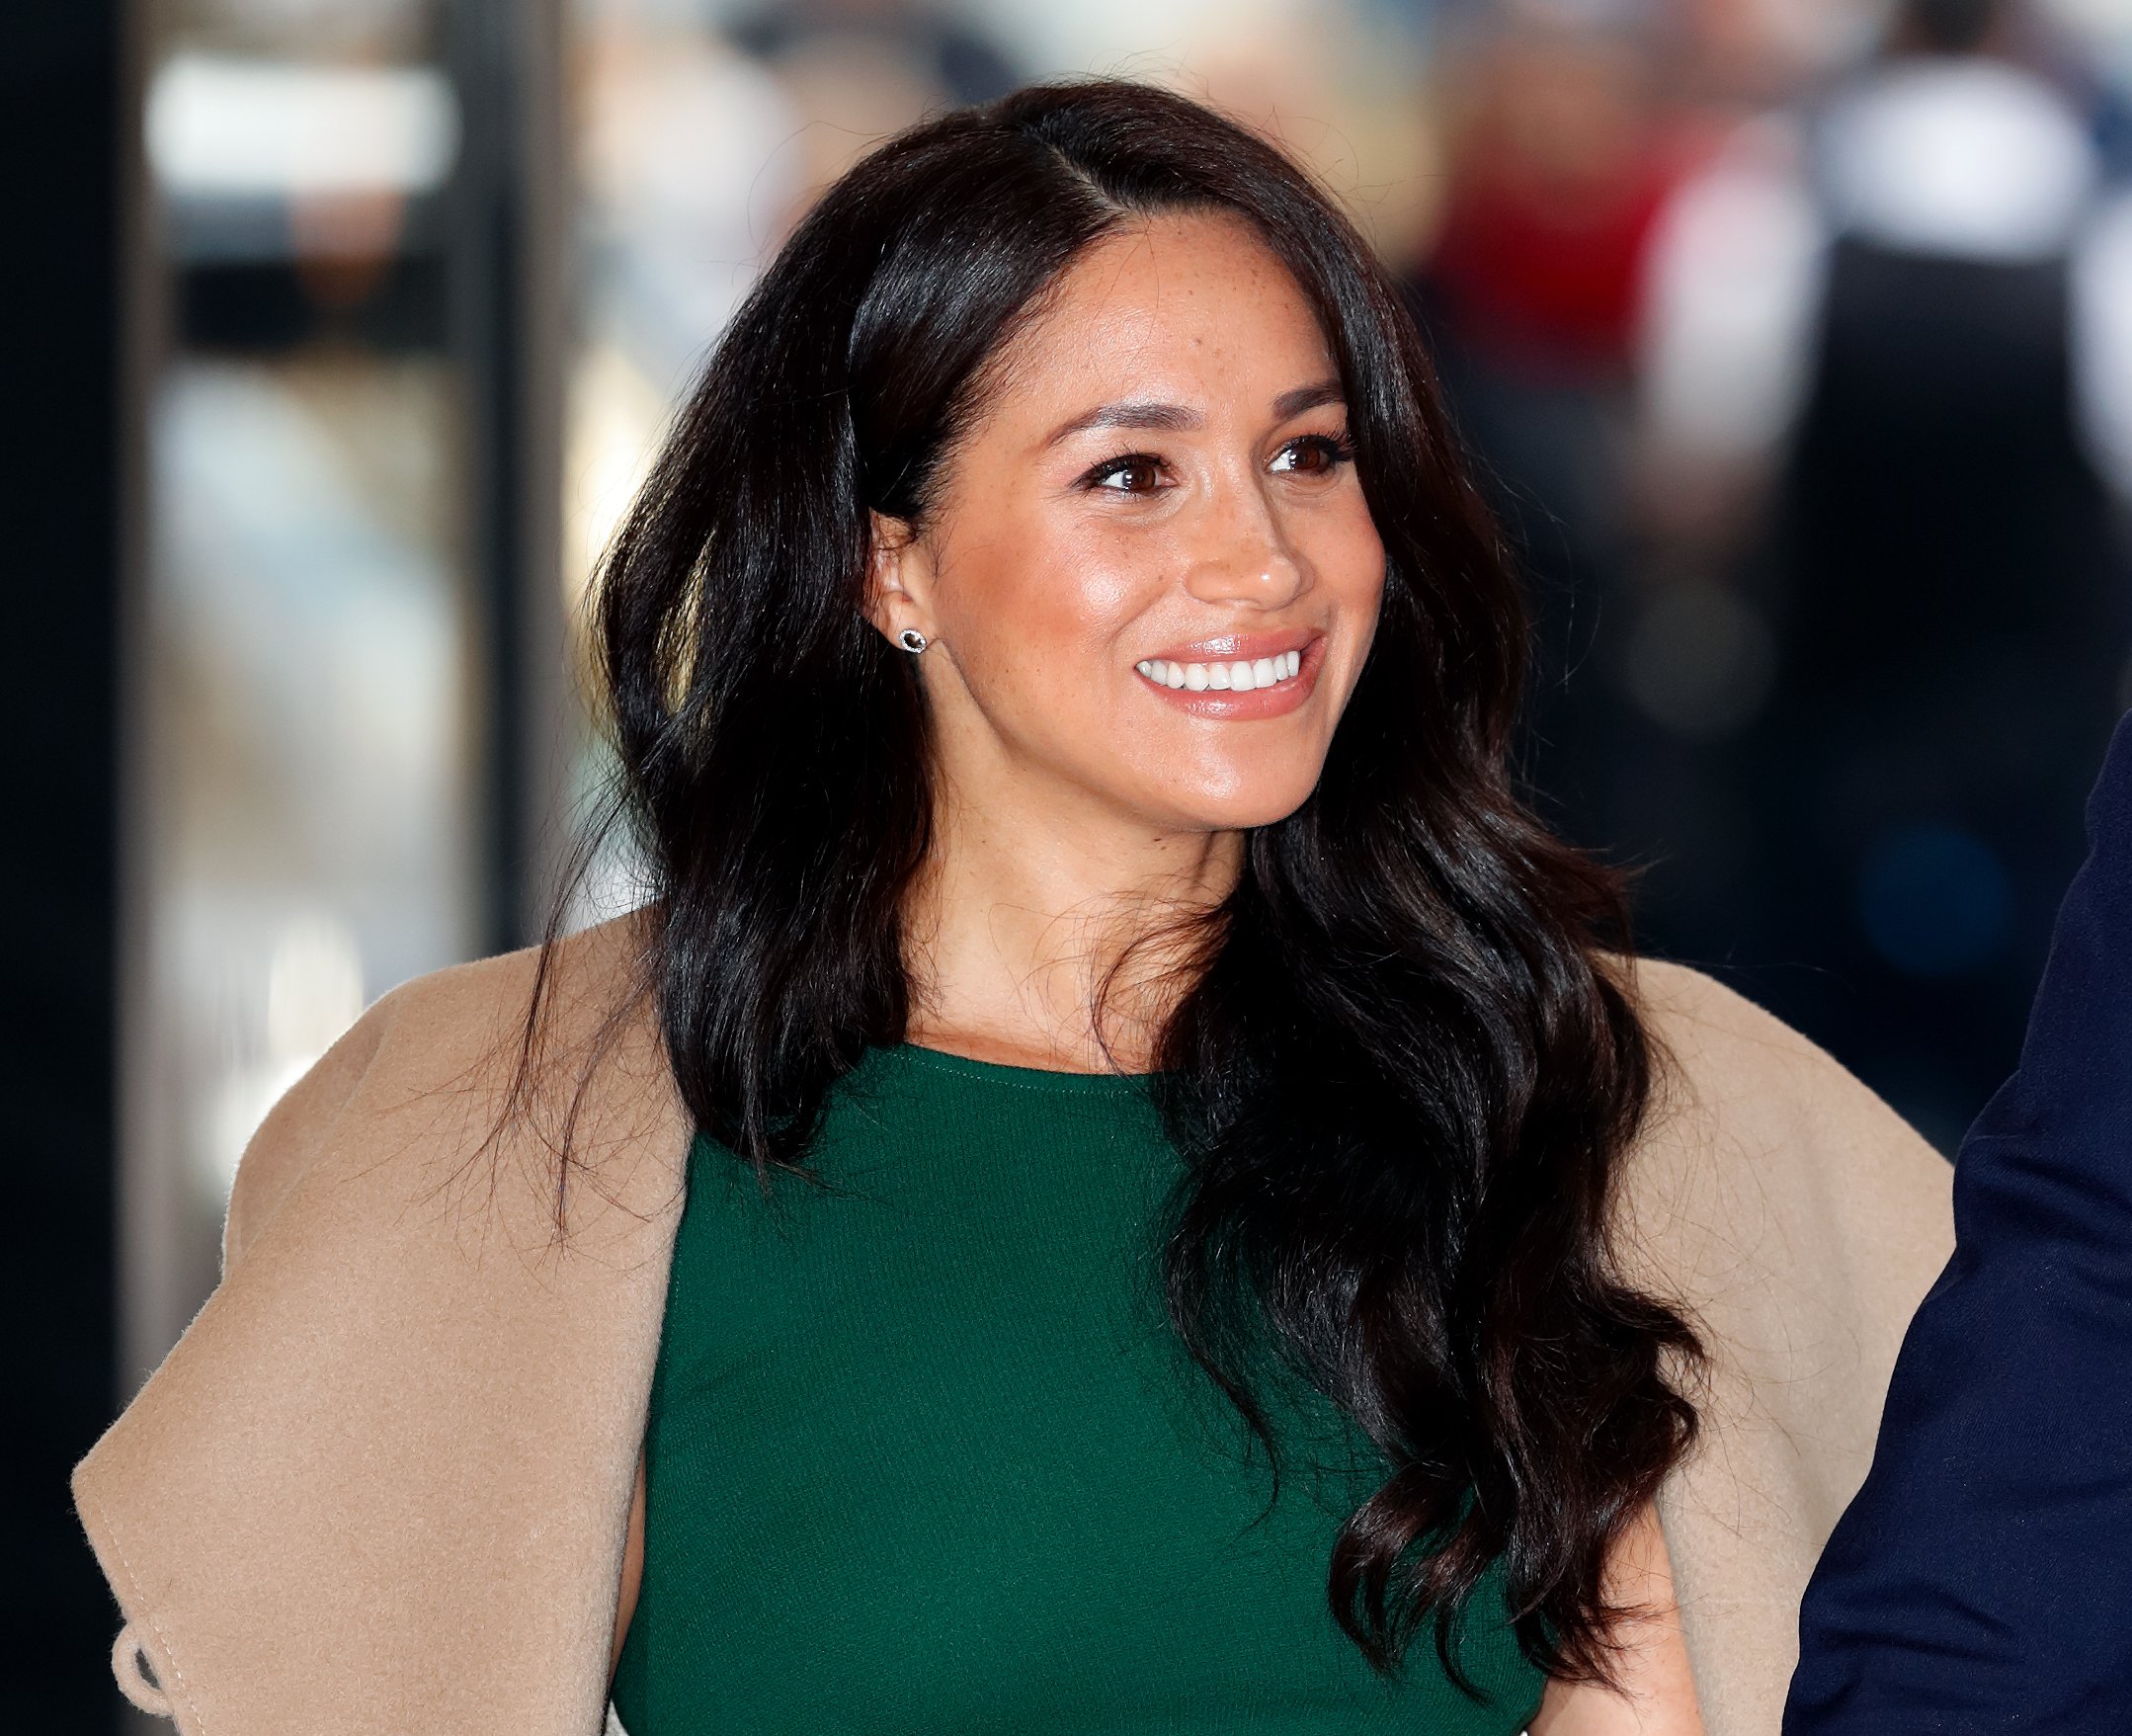 Meghan Markle smiling at the WellChild Awards event in London